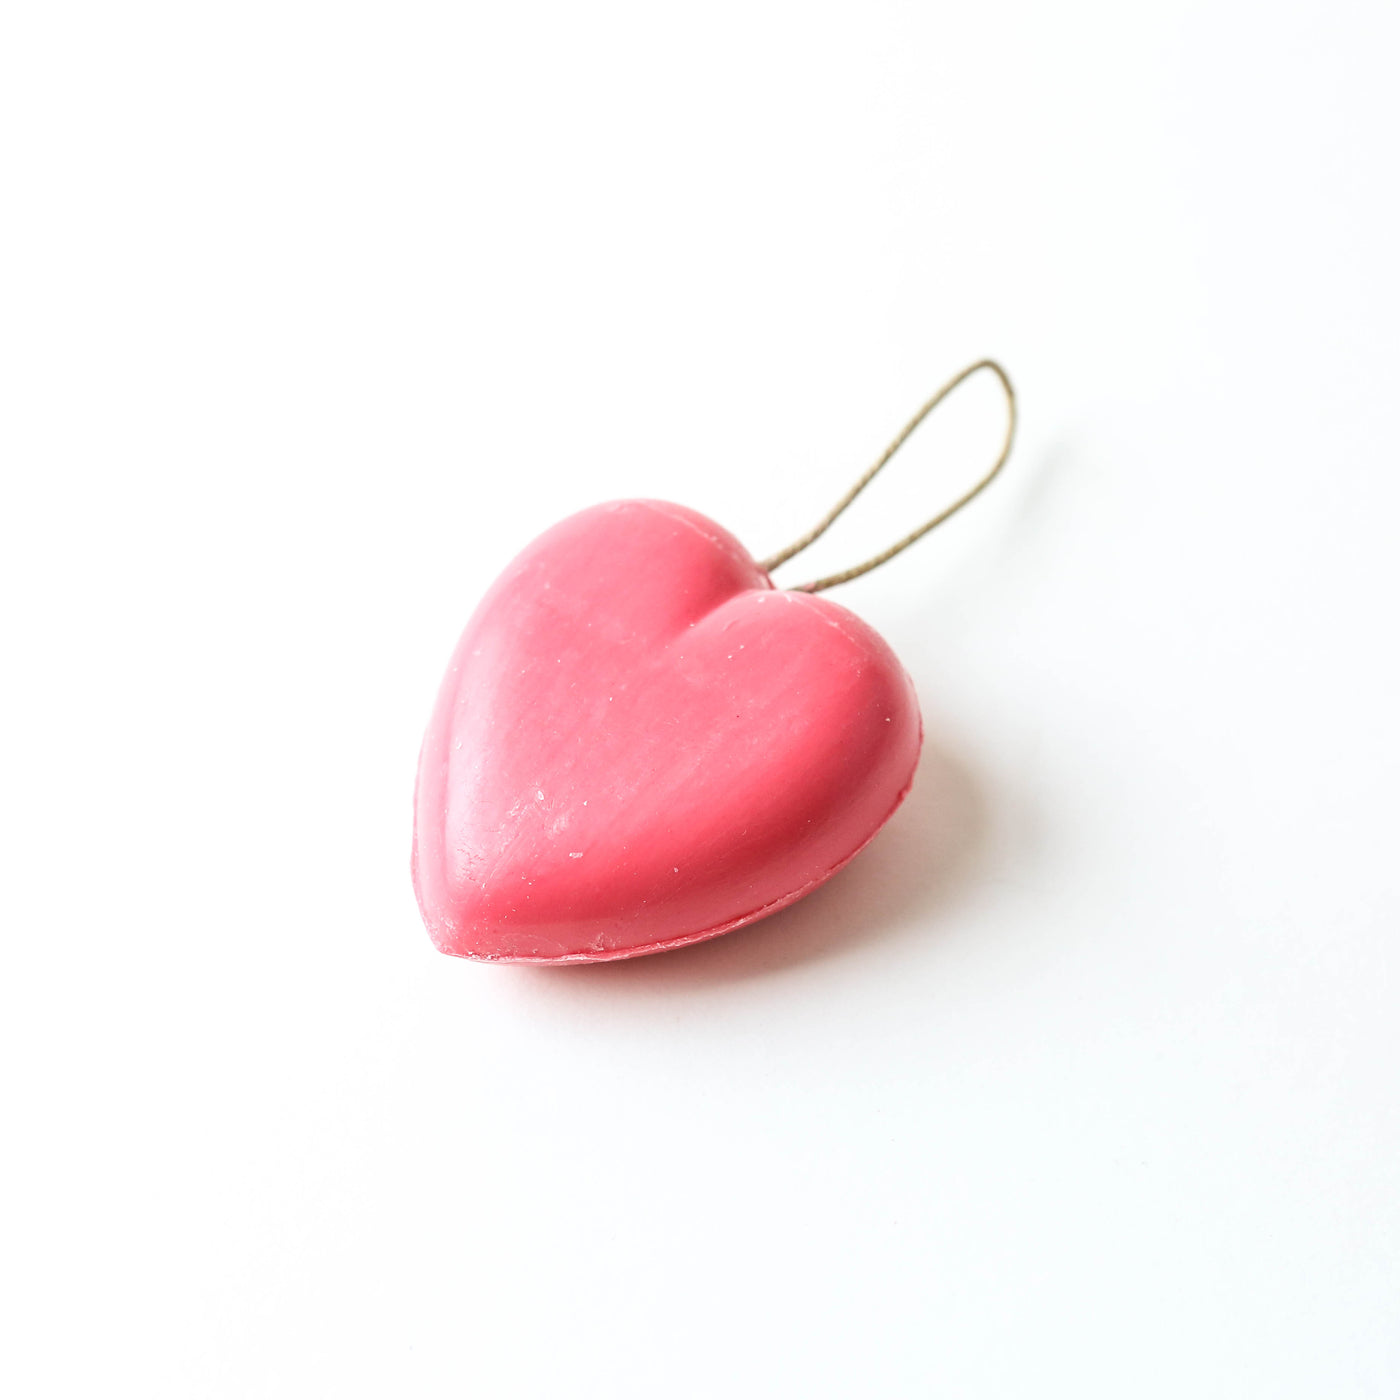 Heart Shaped Traditional Marseille Soap on a Rope 95g